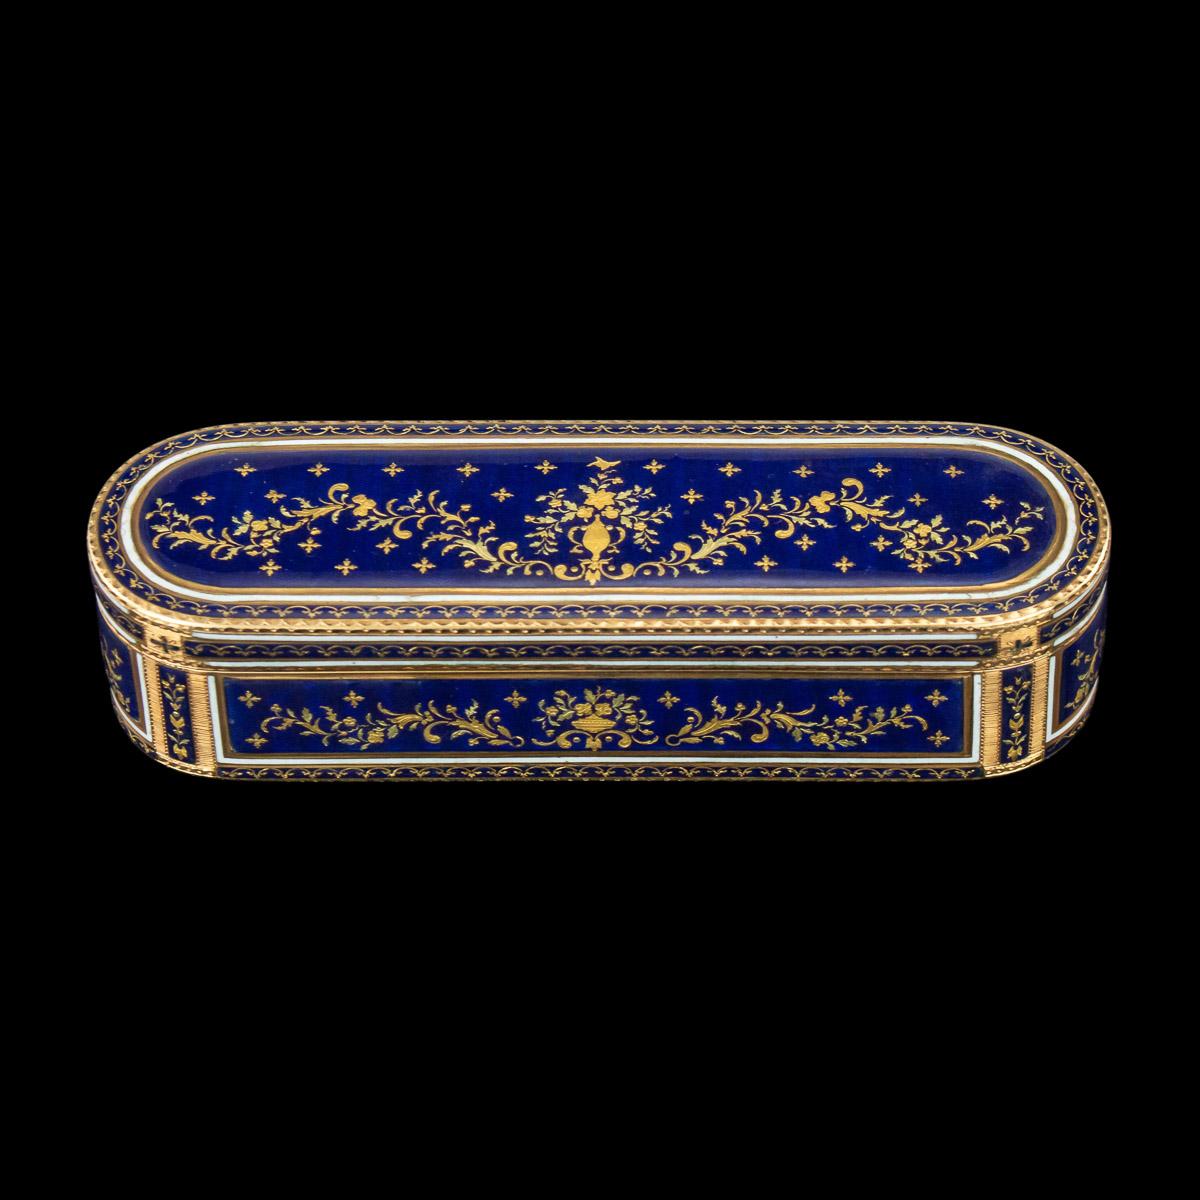 Antique late-18th century German 18k gold snuff box, of oblong form, the lid, sides, top and base applied with translucent royal blue enamel panels over a wavy engine-turned ground, elegantly painted in gold with paillon sprays of flowers within